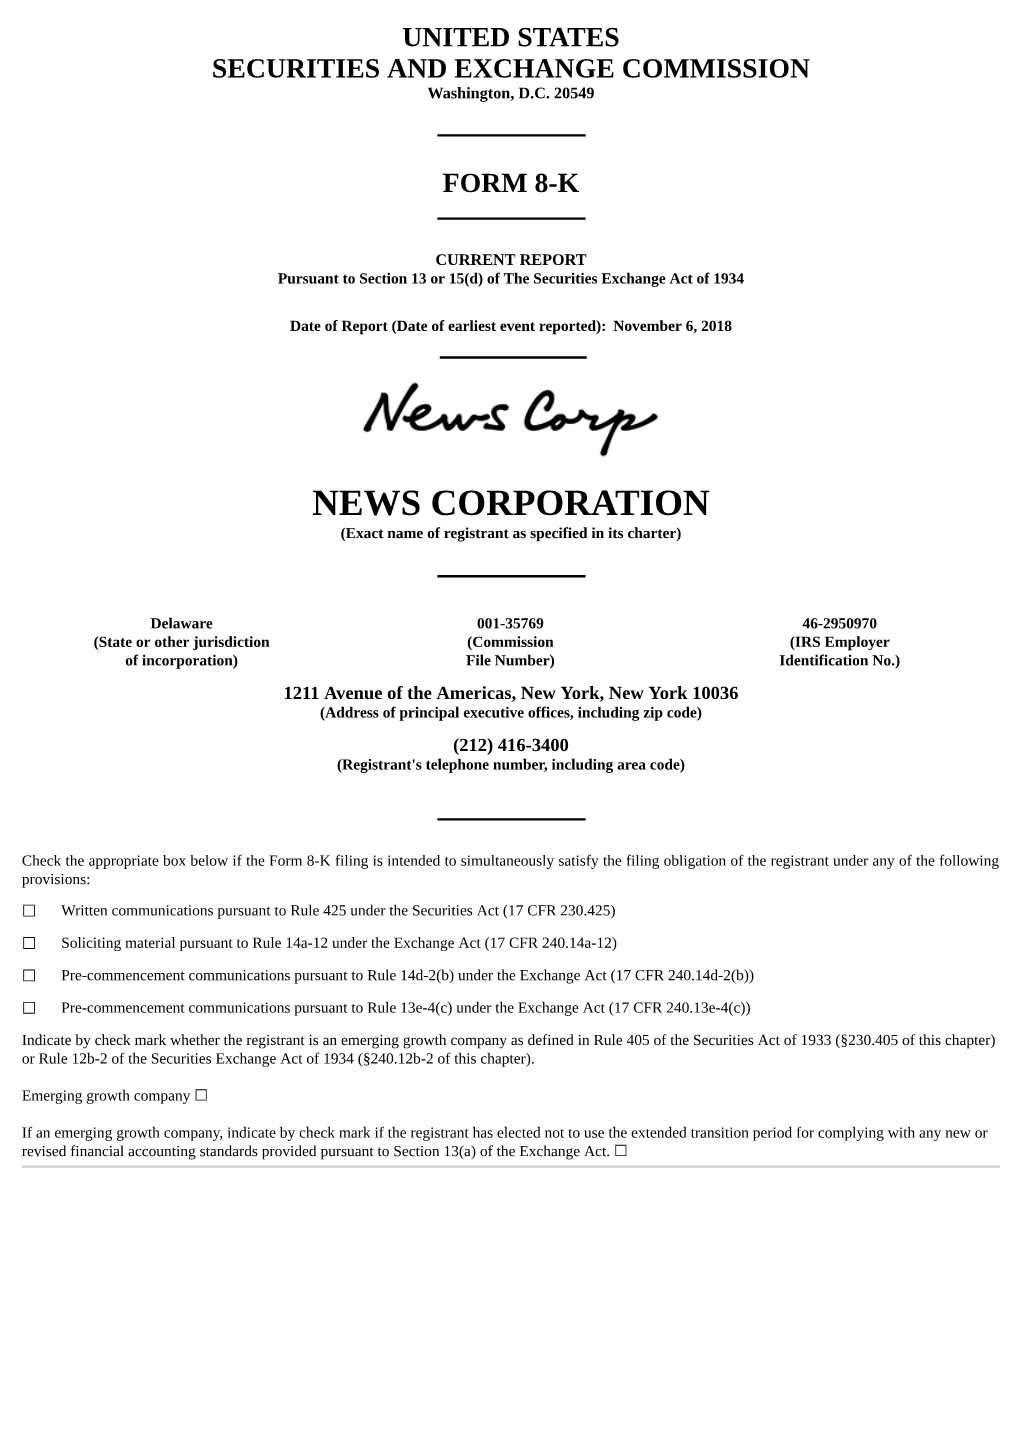 NEWS CORPORATION (Exact Name of Registrant As Specified in Its Charter)